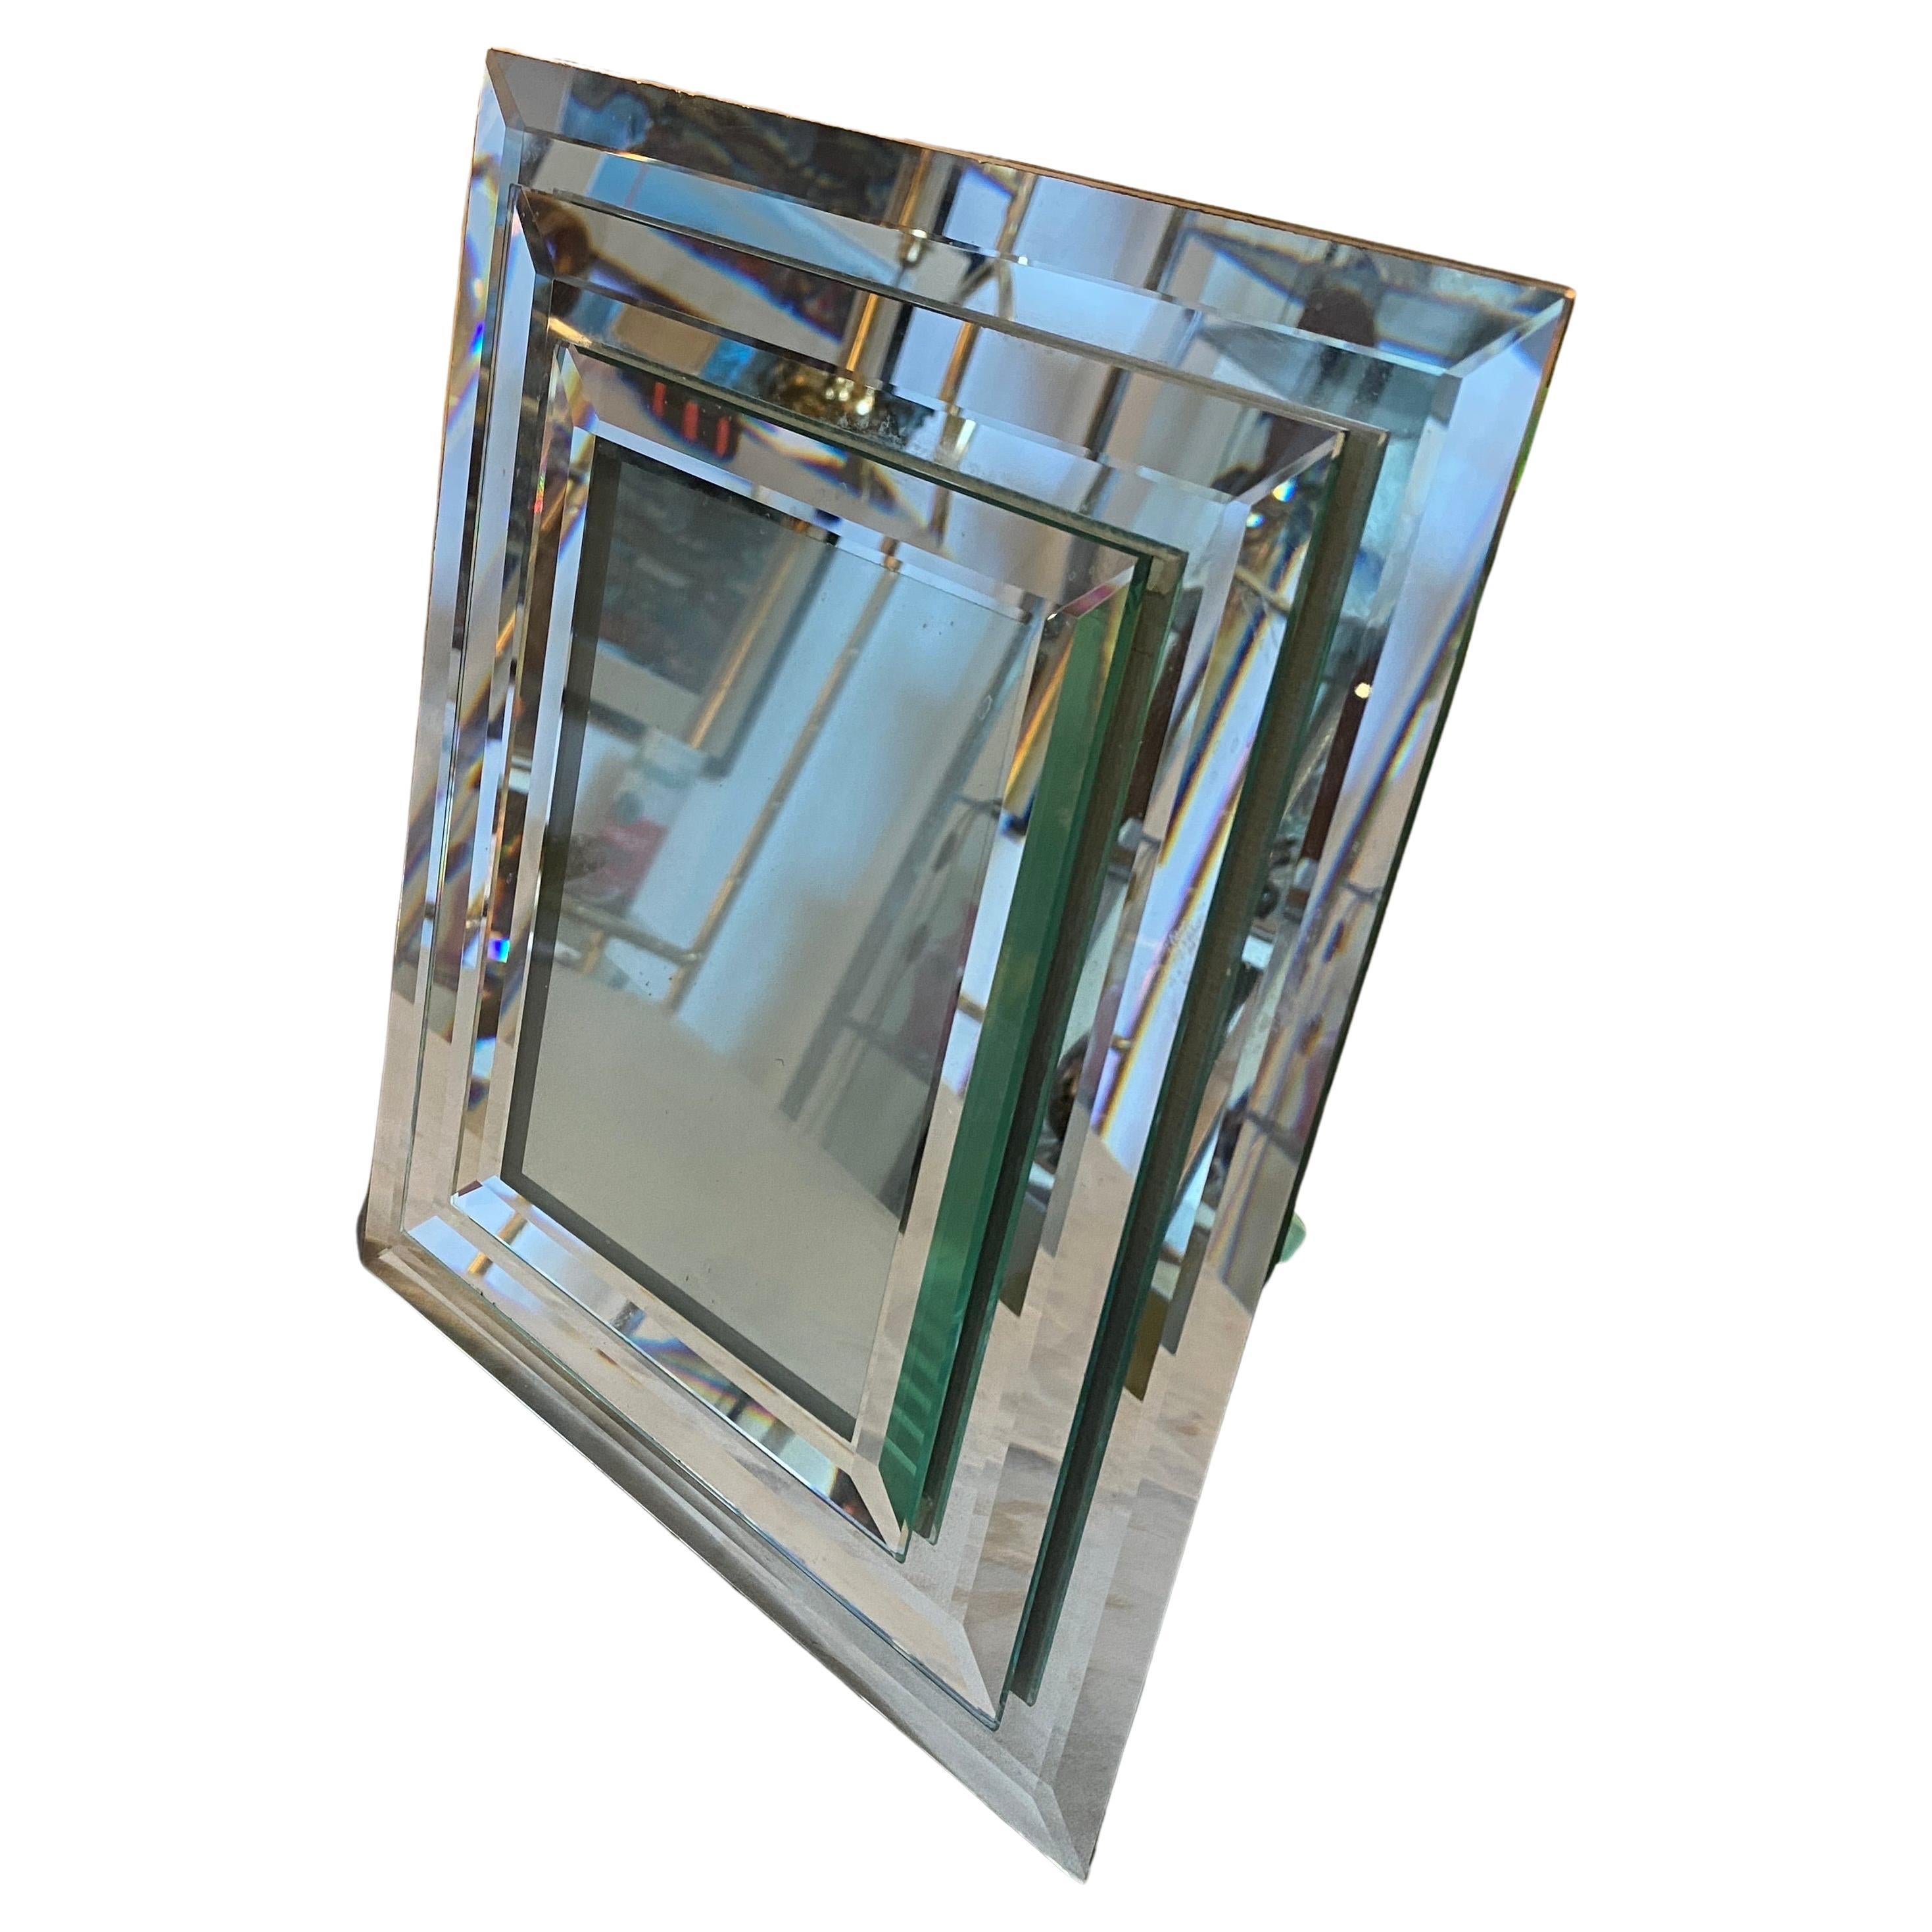 A perfectly preserved mirrored glass rectangular picture frame designed and manufactured by Fontana Arte, one of the leading manufacturers of Mid-Century Modern design in Italy. The Mirrored Glass Picture Frame by Fontana Arte is an exemplary piece